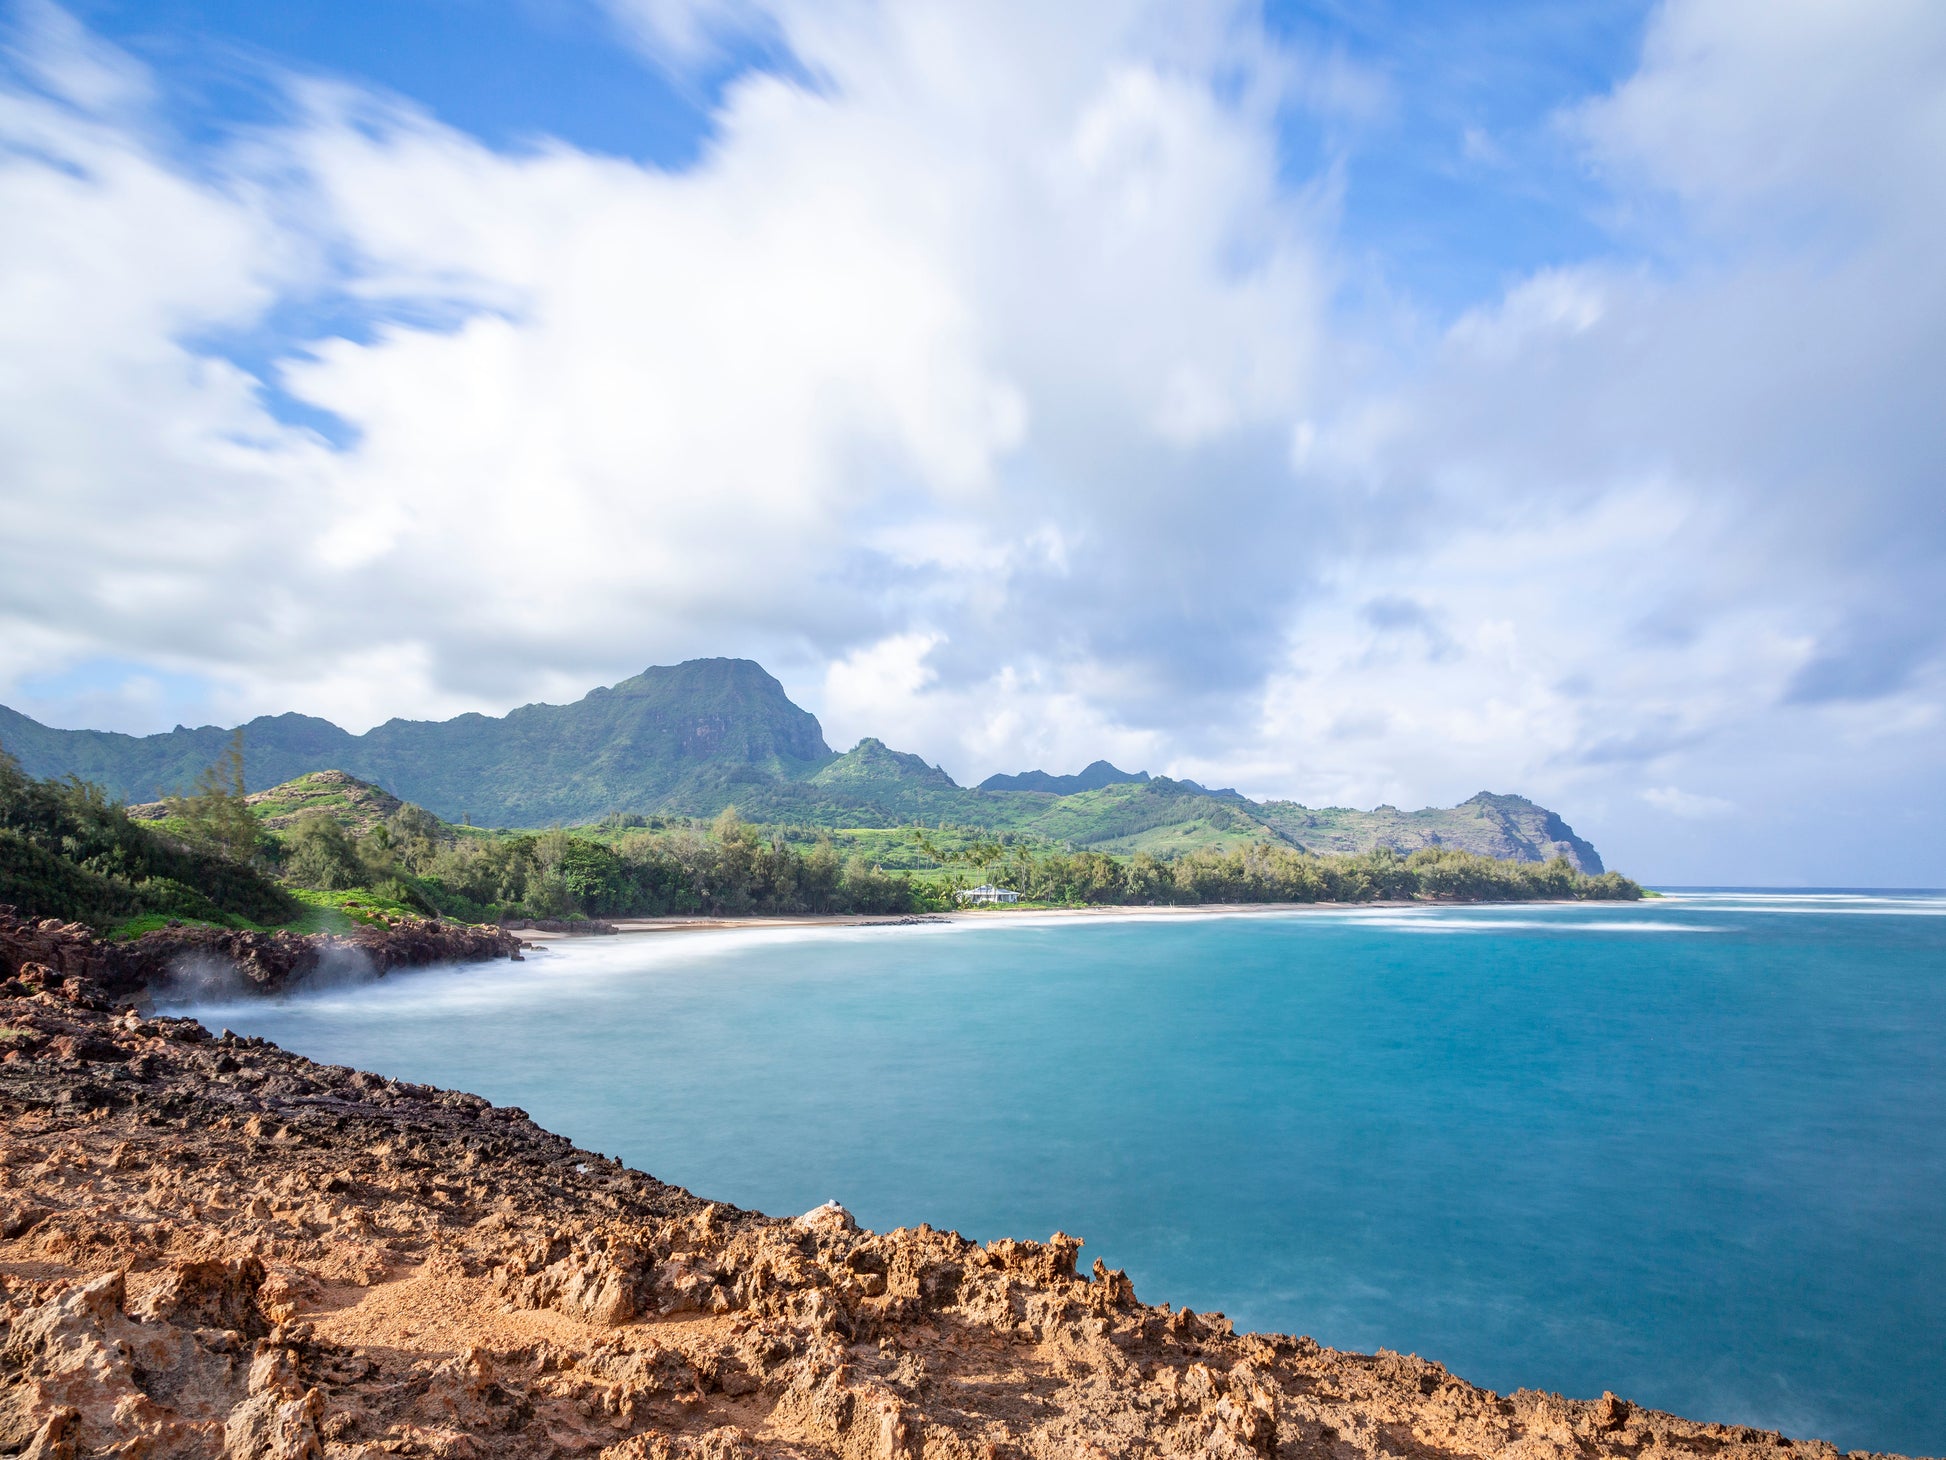 A fine art photograph of Mahaulepu Beach on Kauai. Jagged rocks in the foreground are juxtaposed by soft blue ocean water, the beach, and mountain range in the background. Landscape photograph by Inspiring Images Hawaii.